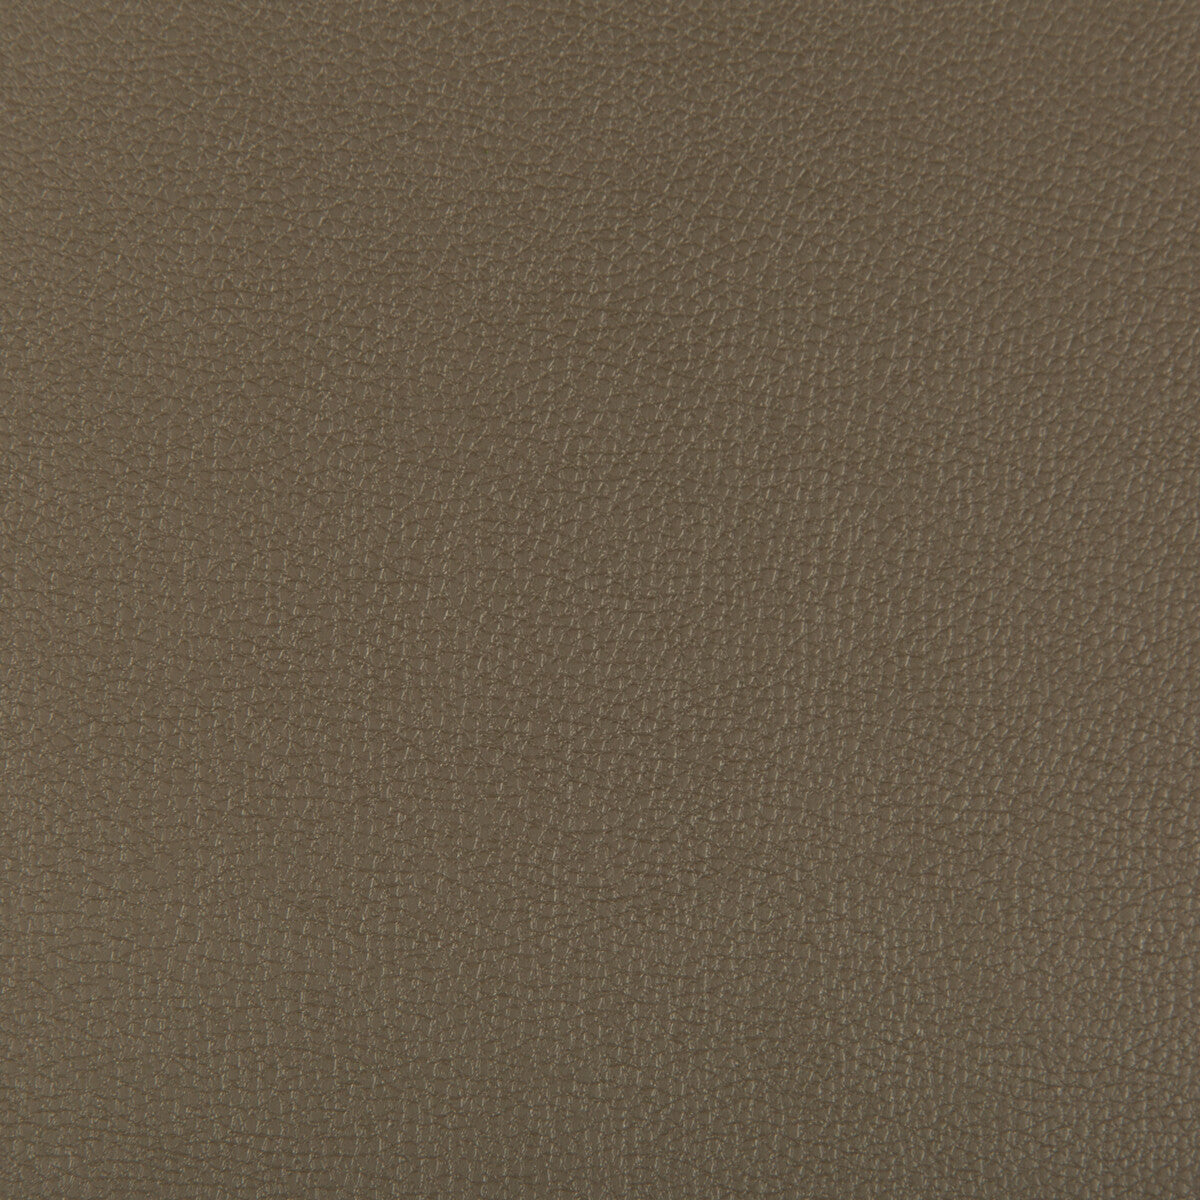 Syrus fabric in porcini color - pattern SYRUS.606.0 - by Kravet Contract